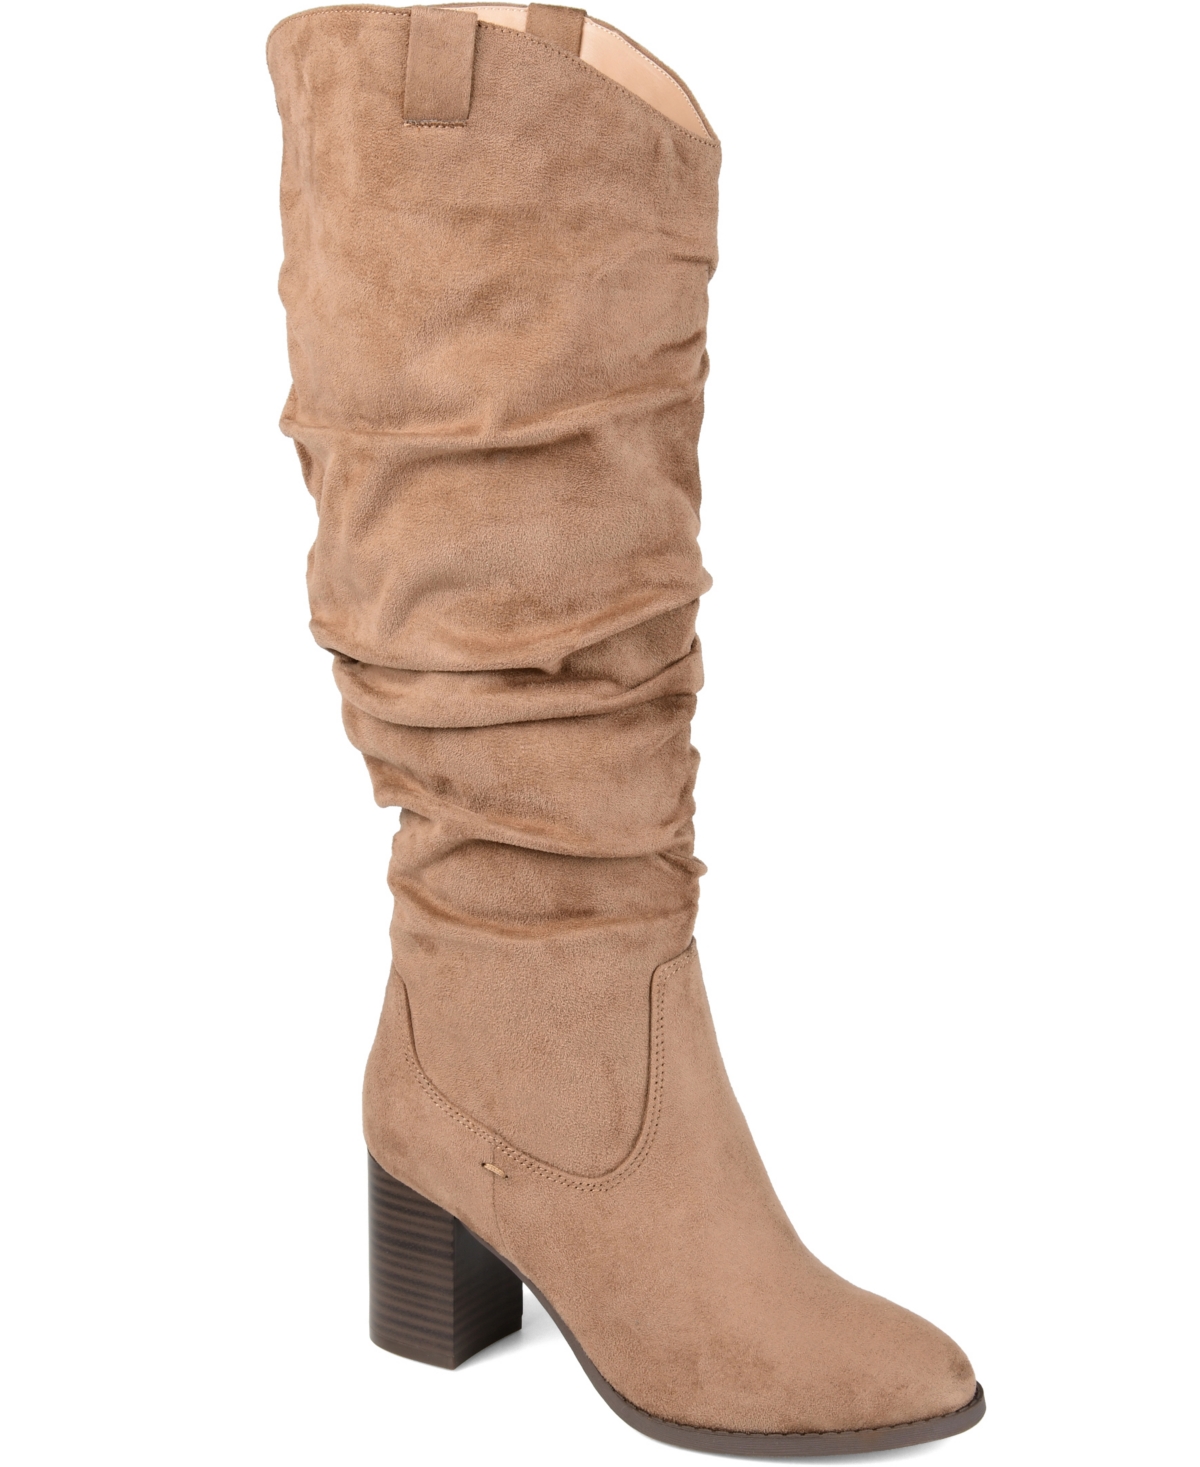 Vintage Boots, Retro Boots Journee Collection Womens Aneil Wide Calf Boots - Taupe $82.49 AT vintagedancer.com